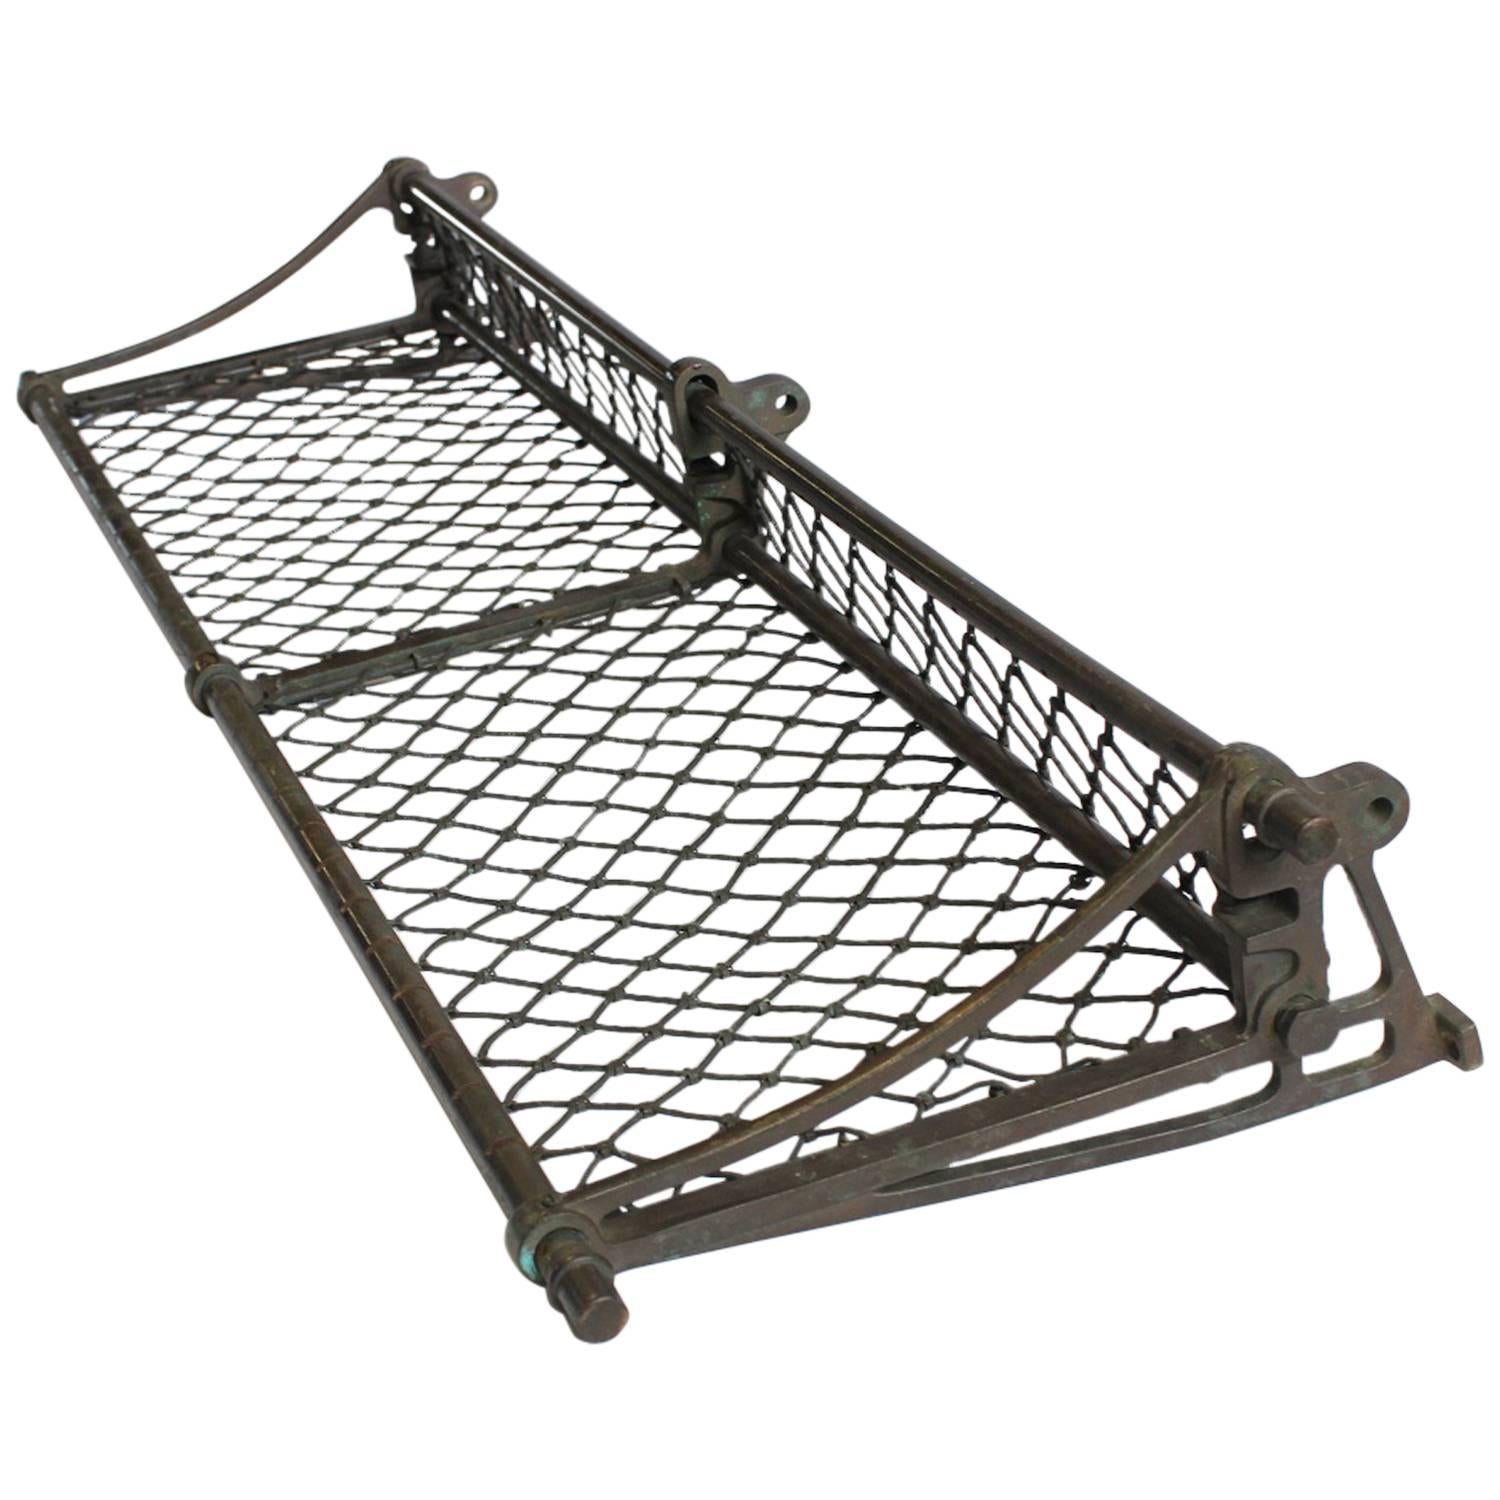 Antique American Train Luggage Rack For Sale